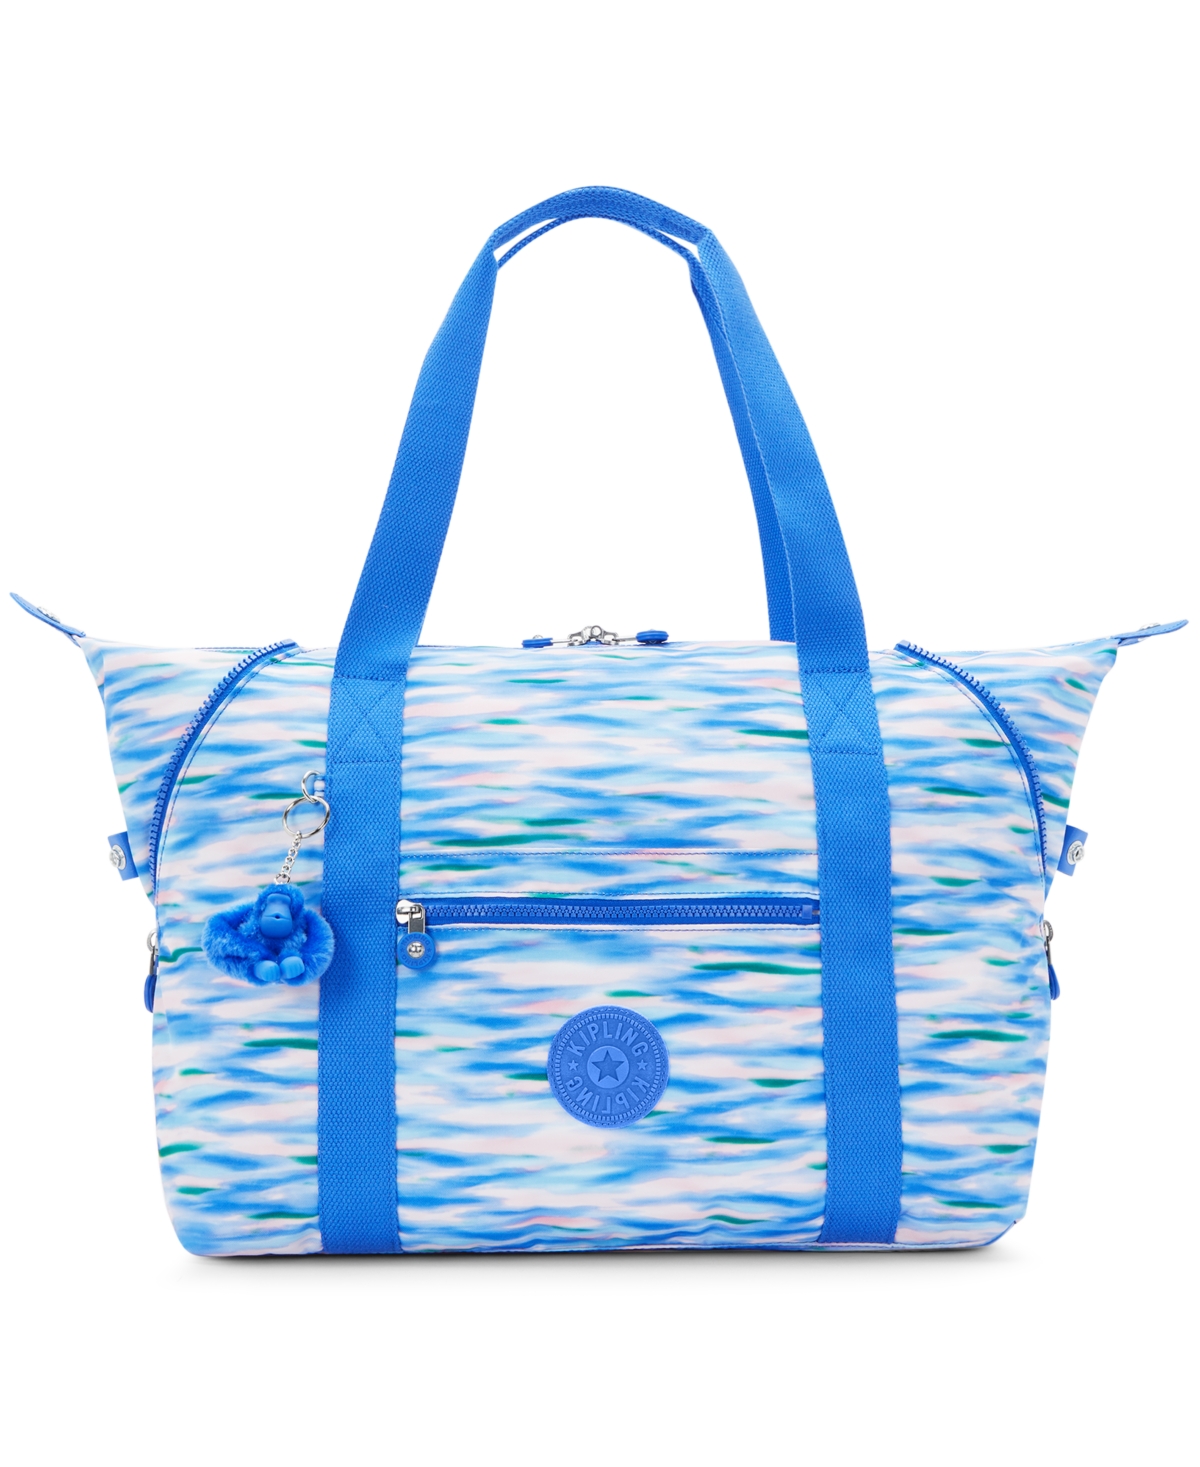 Art Nylon Tote Bag - Diluted Blue